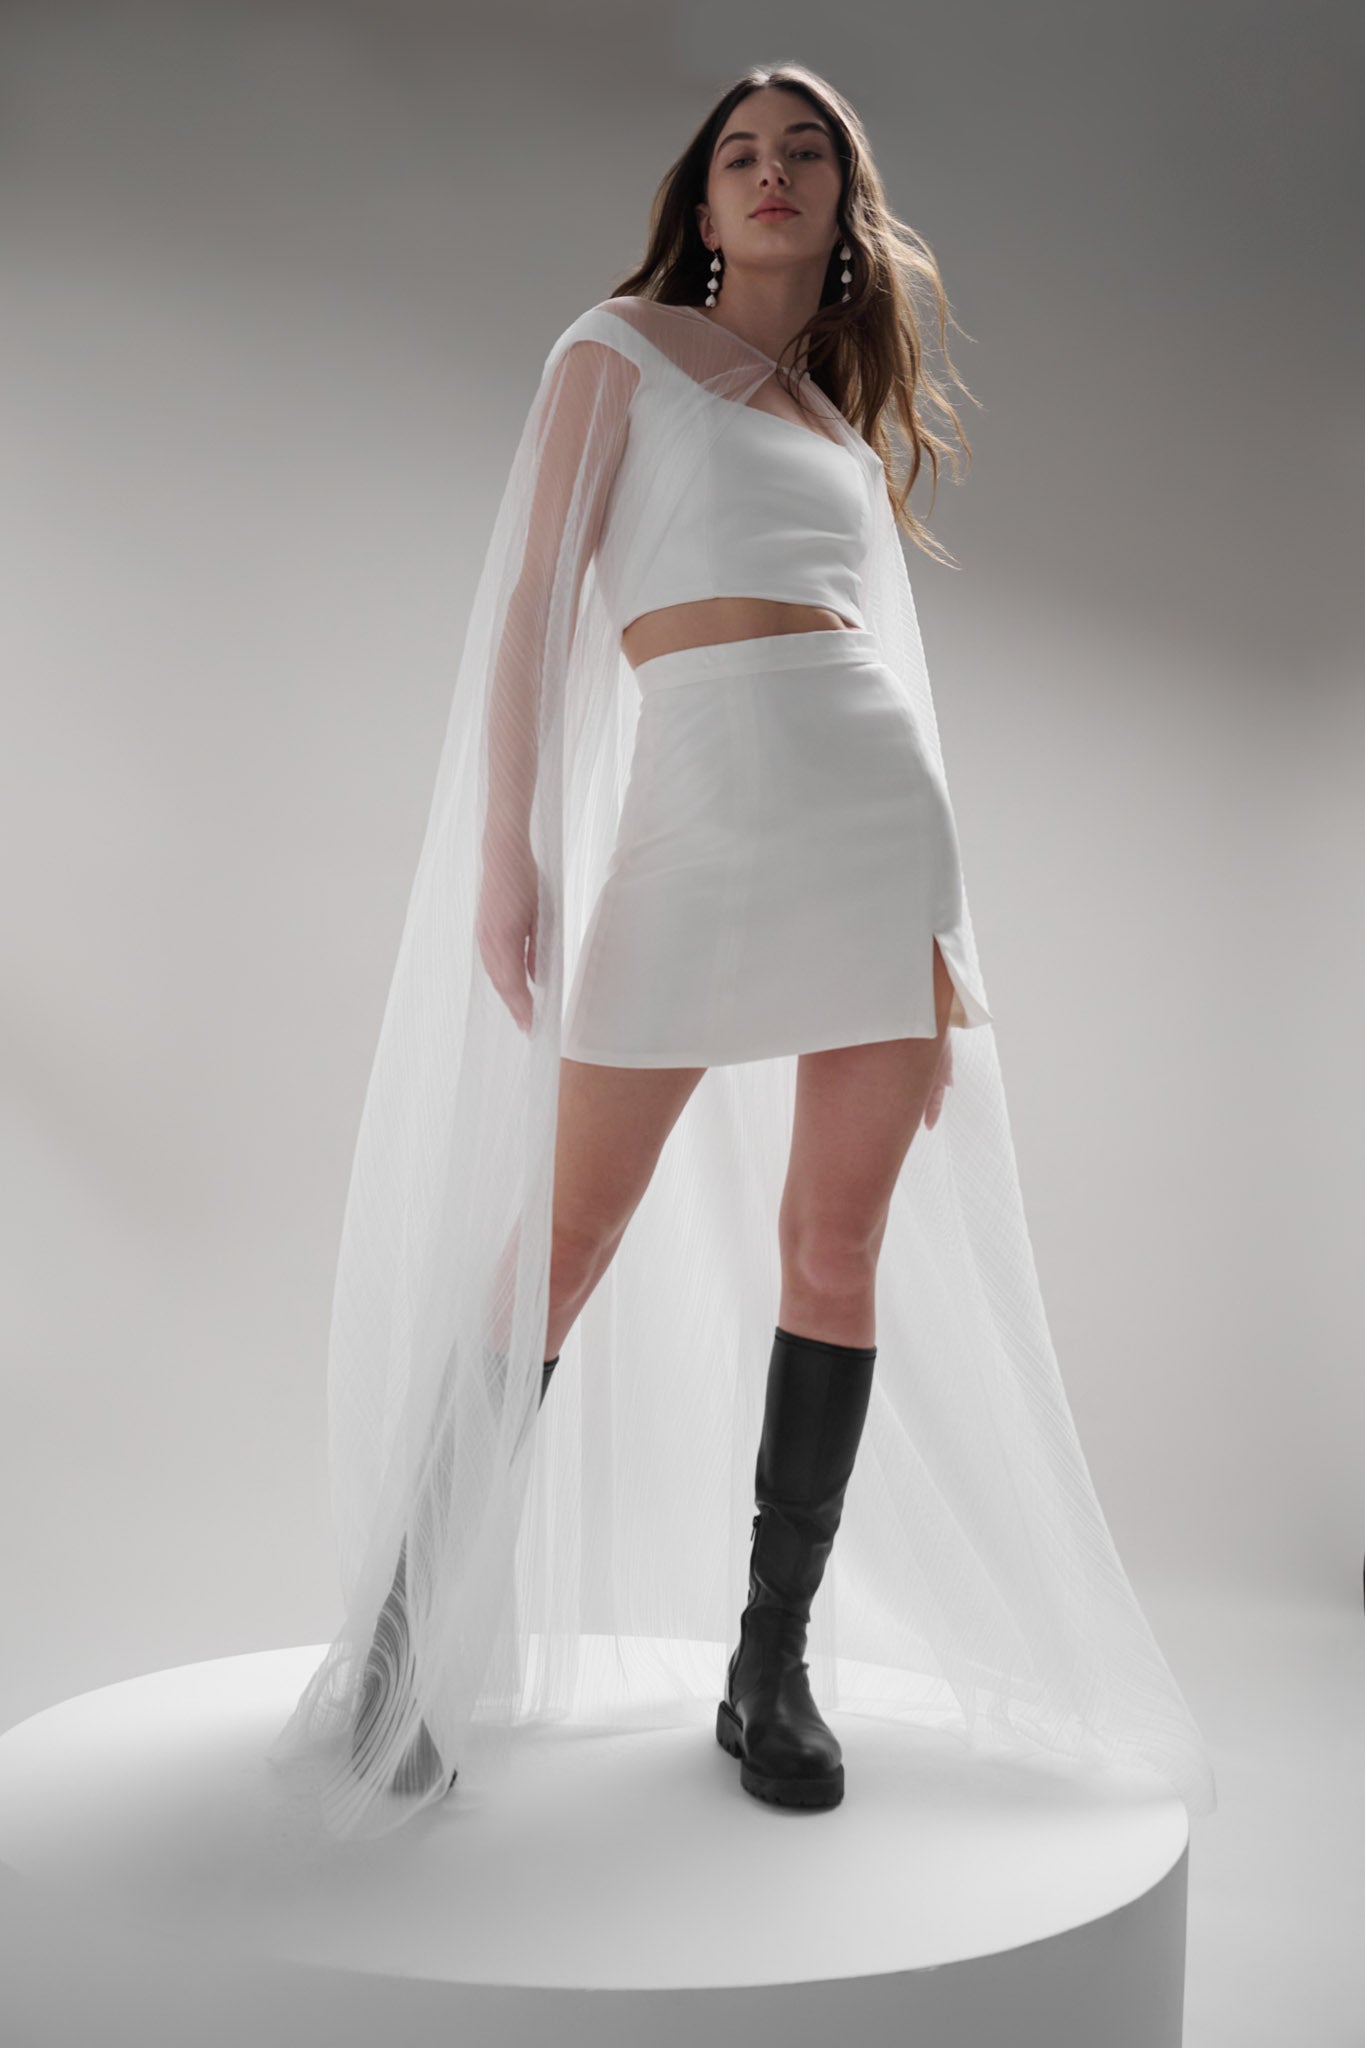 Coquille Cape - a modern veil alternative made with translucent tulle that adds ethereal beauty to any look. Featuring a hidden hook and eye closure for easy removal and showcasing the details underneath, this accessory is an effortless two-in-one outfit